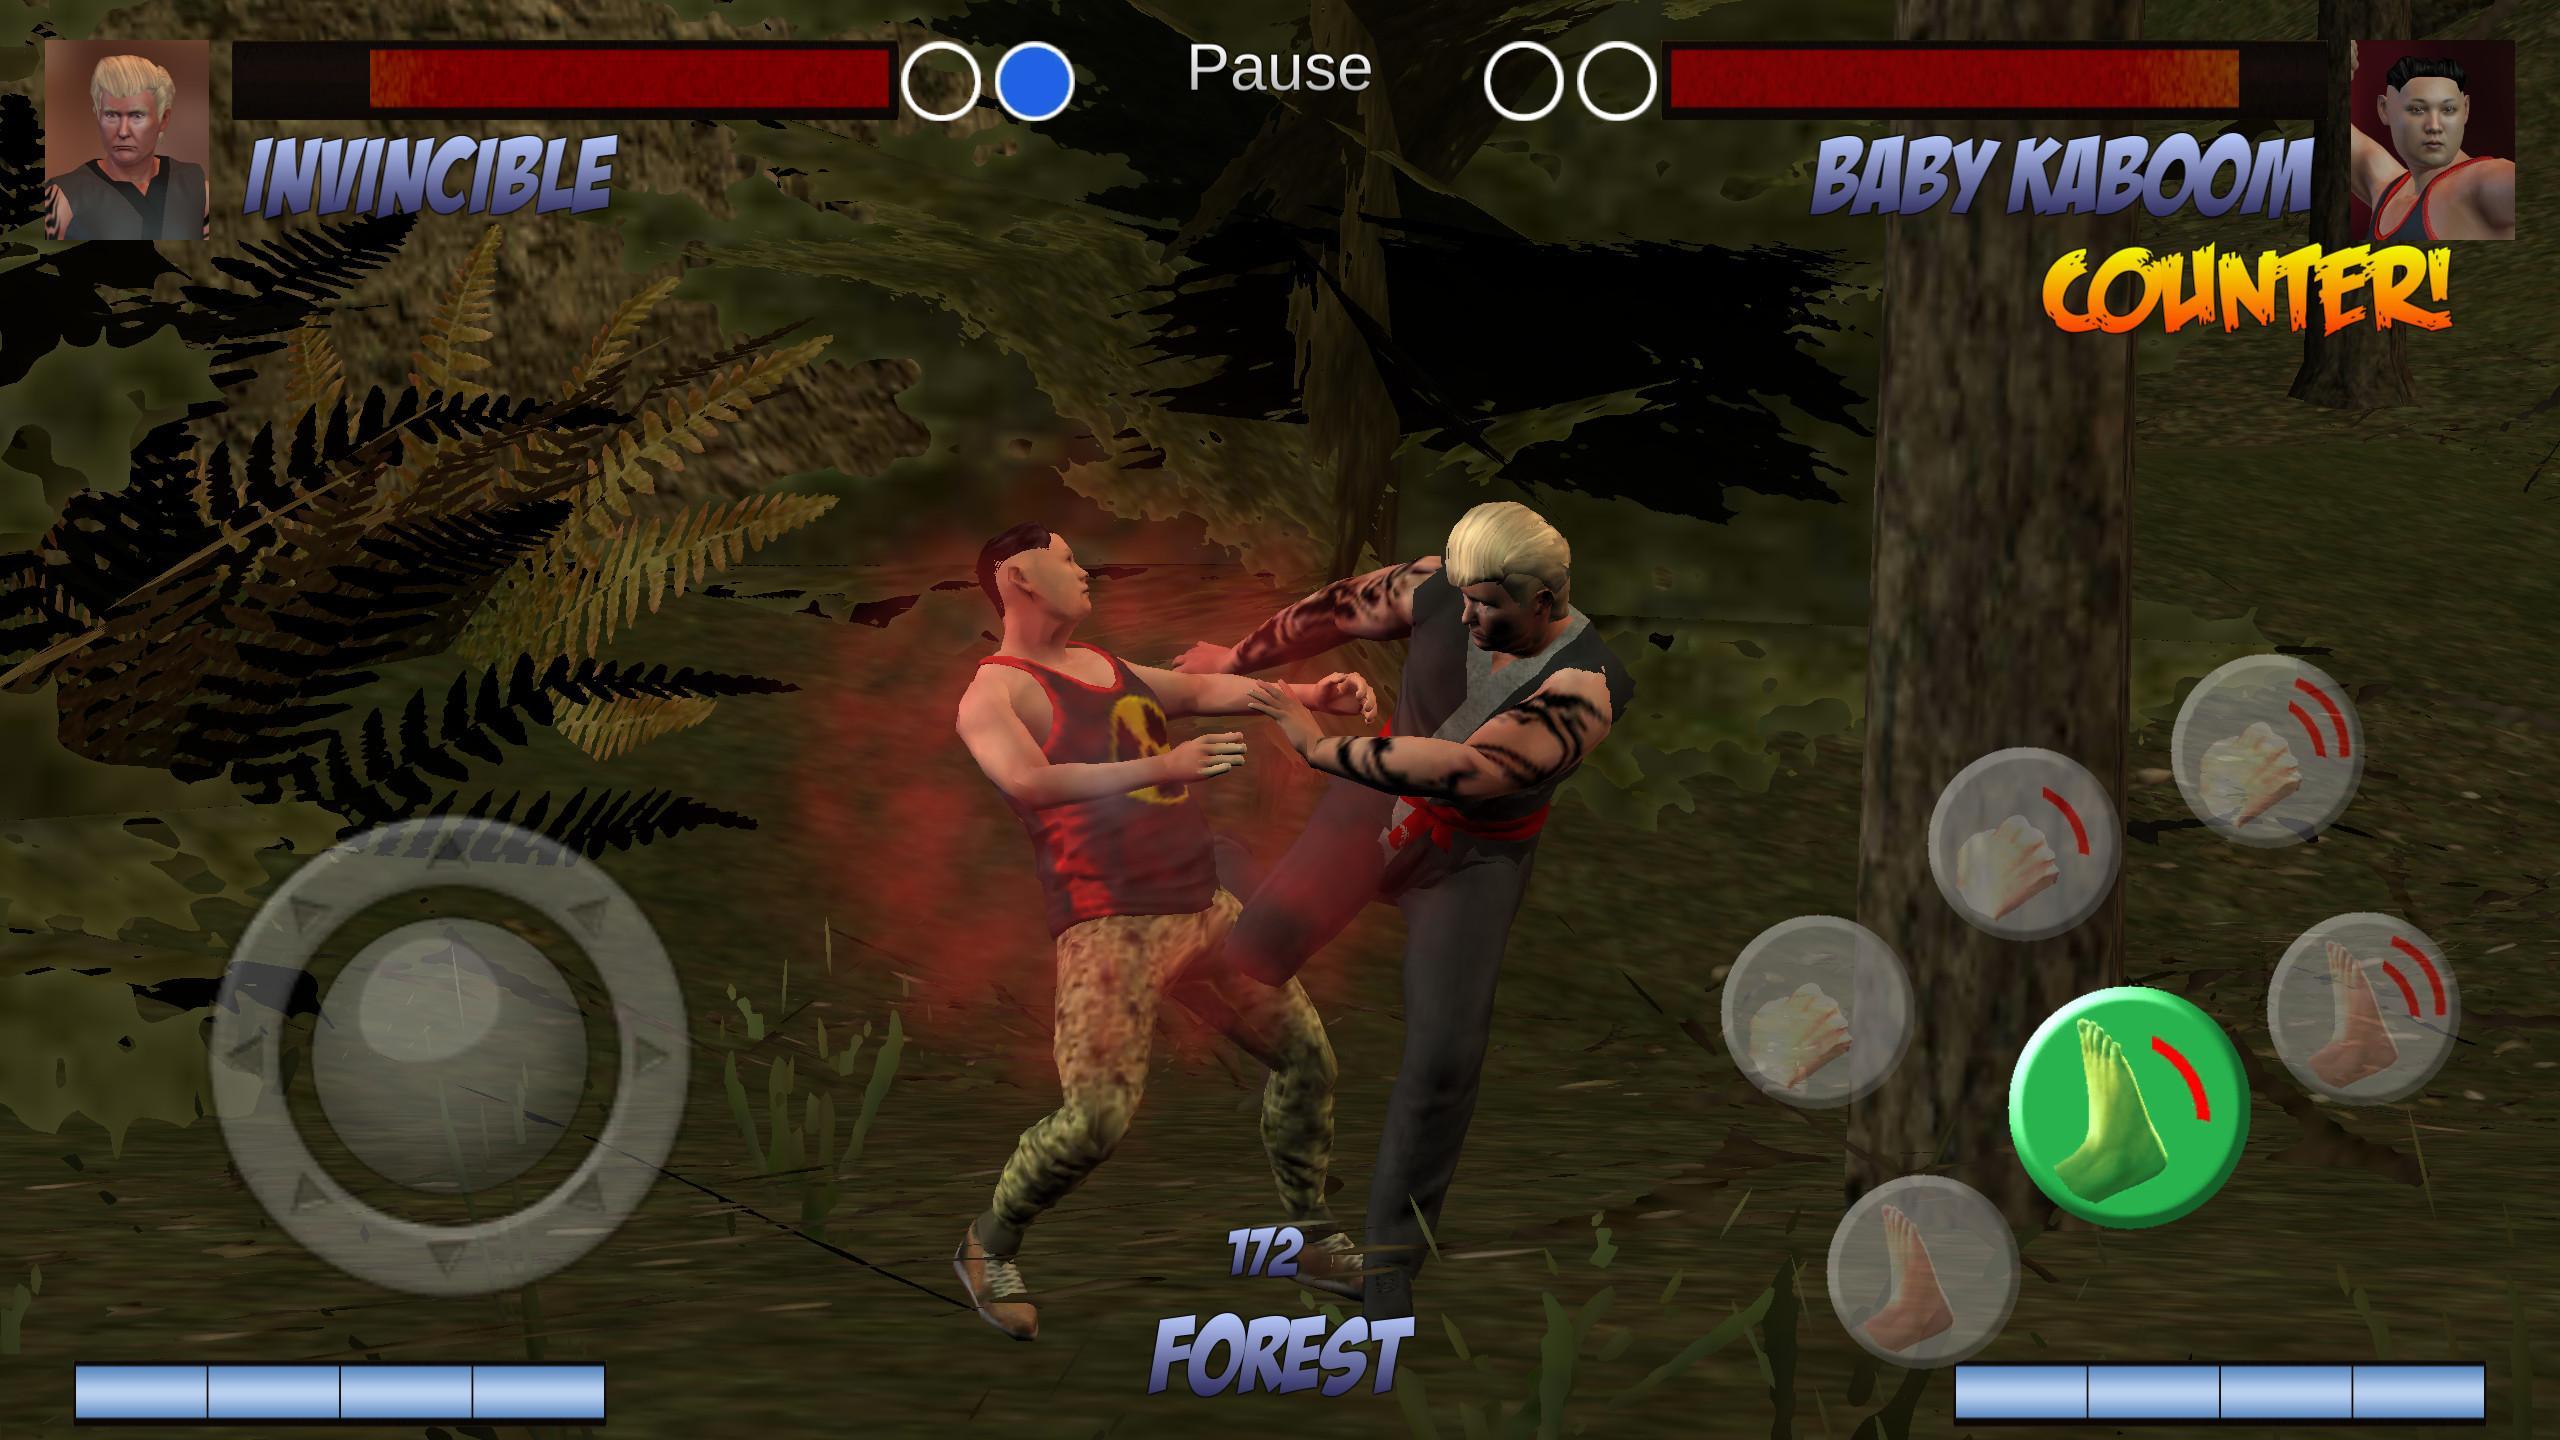 Top Dog Combat for Android - APK Download